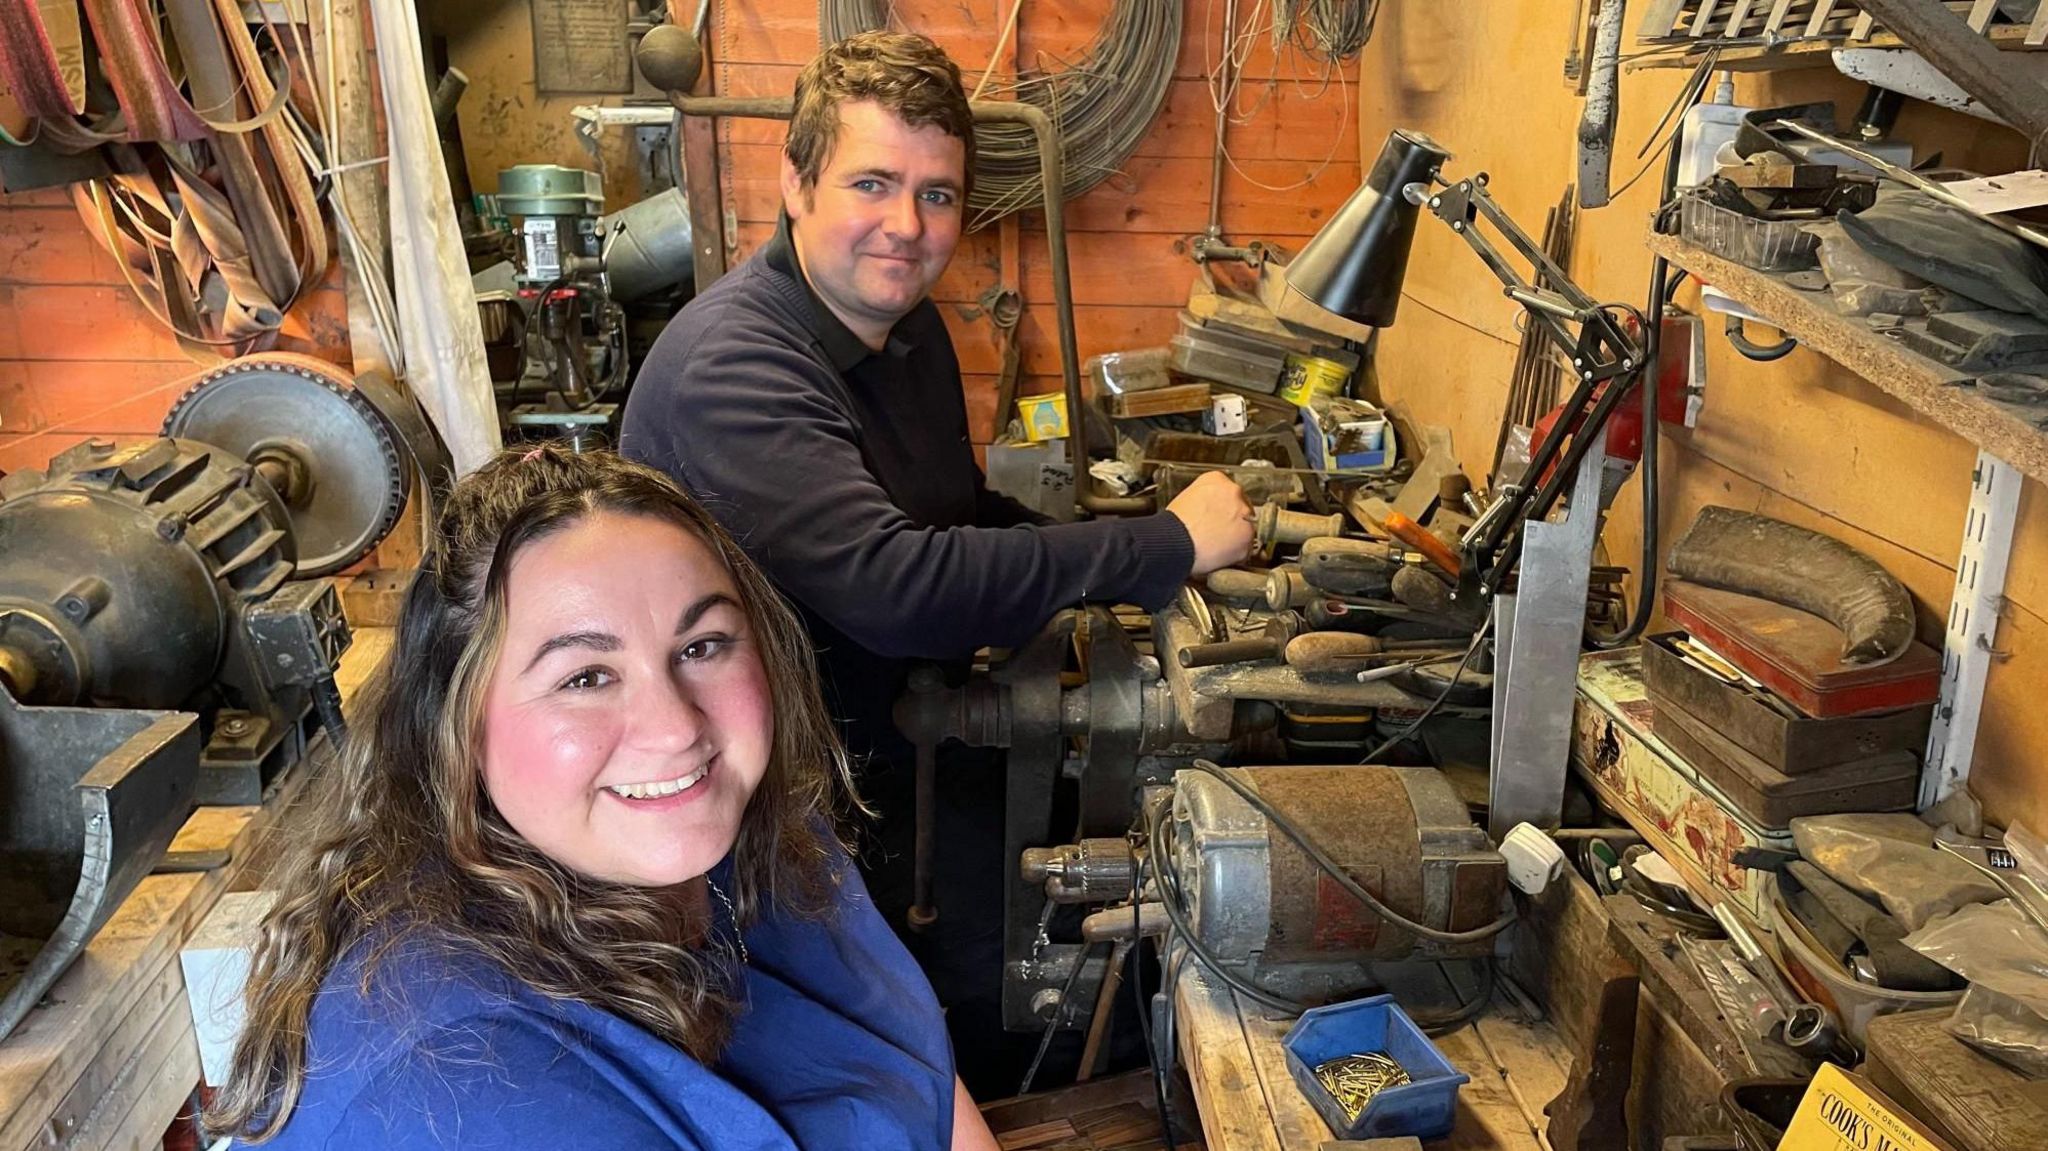 A man and woman sit next to each other in a shed surrounded by old machinery